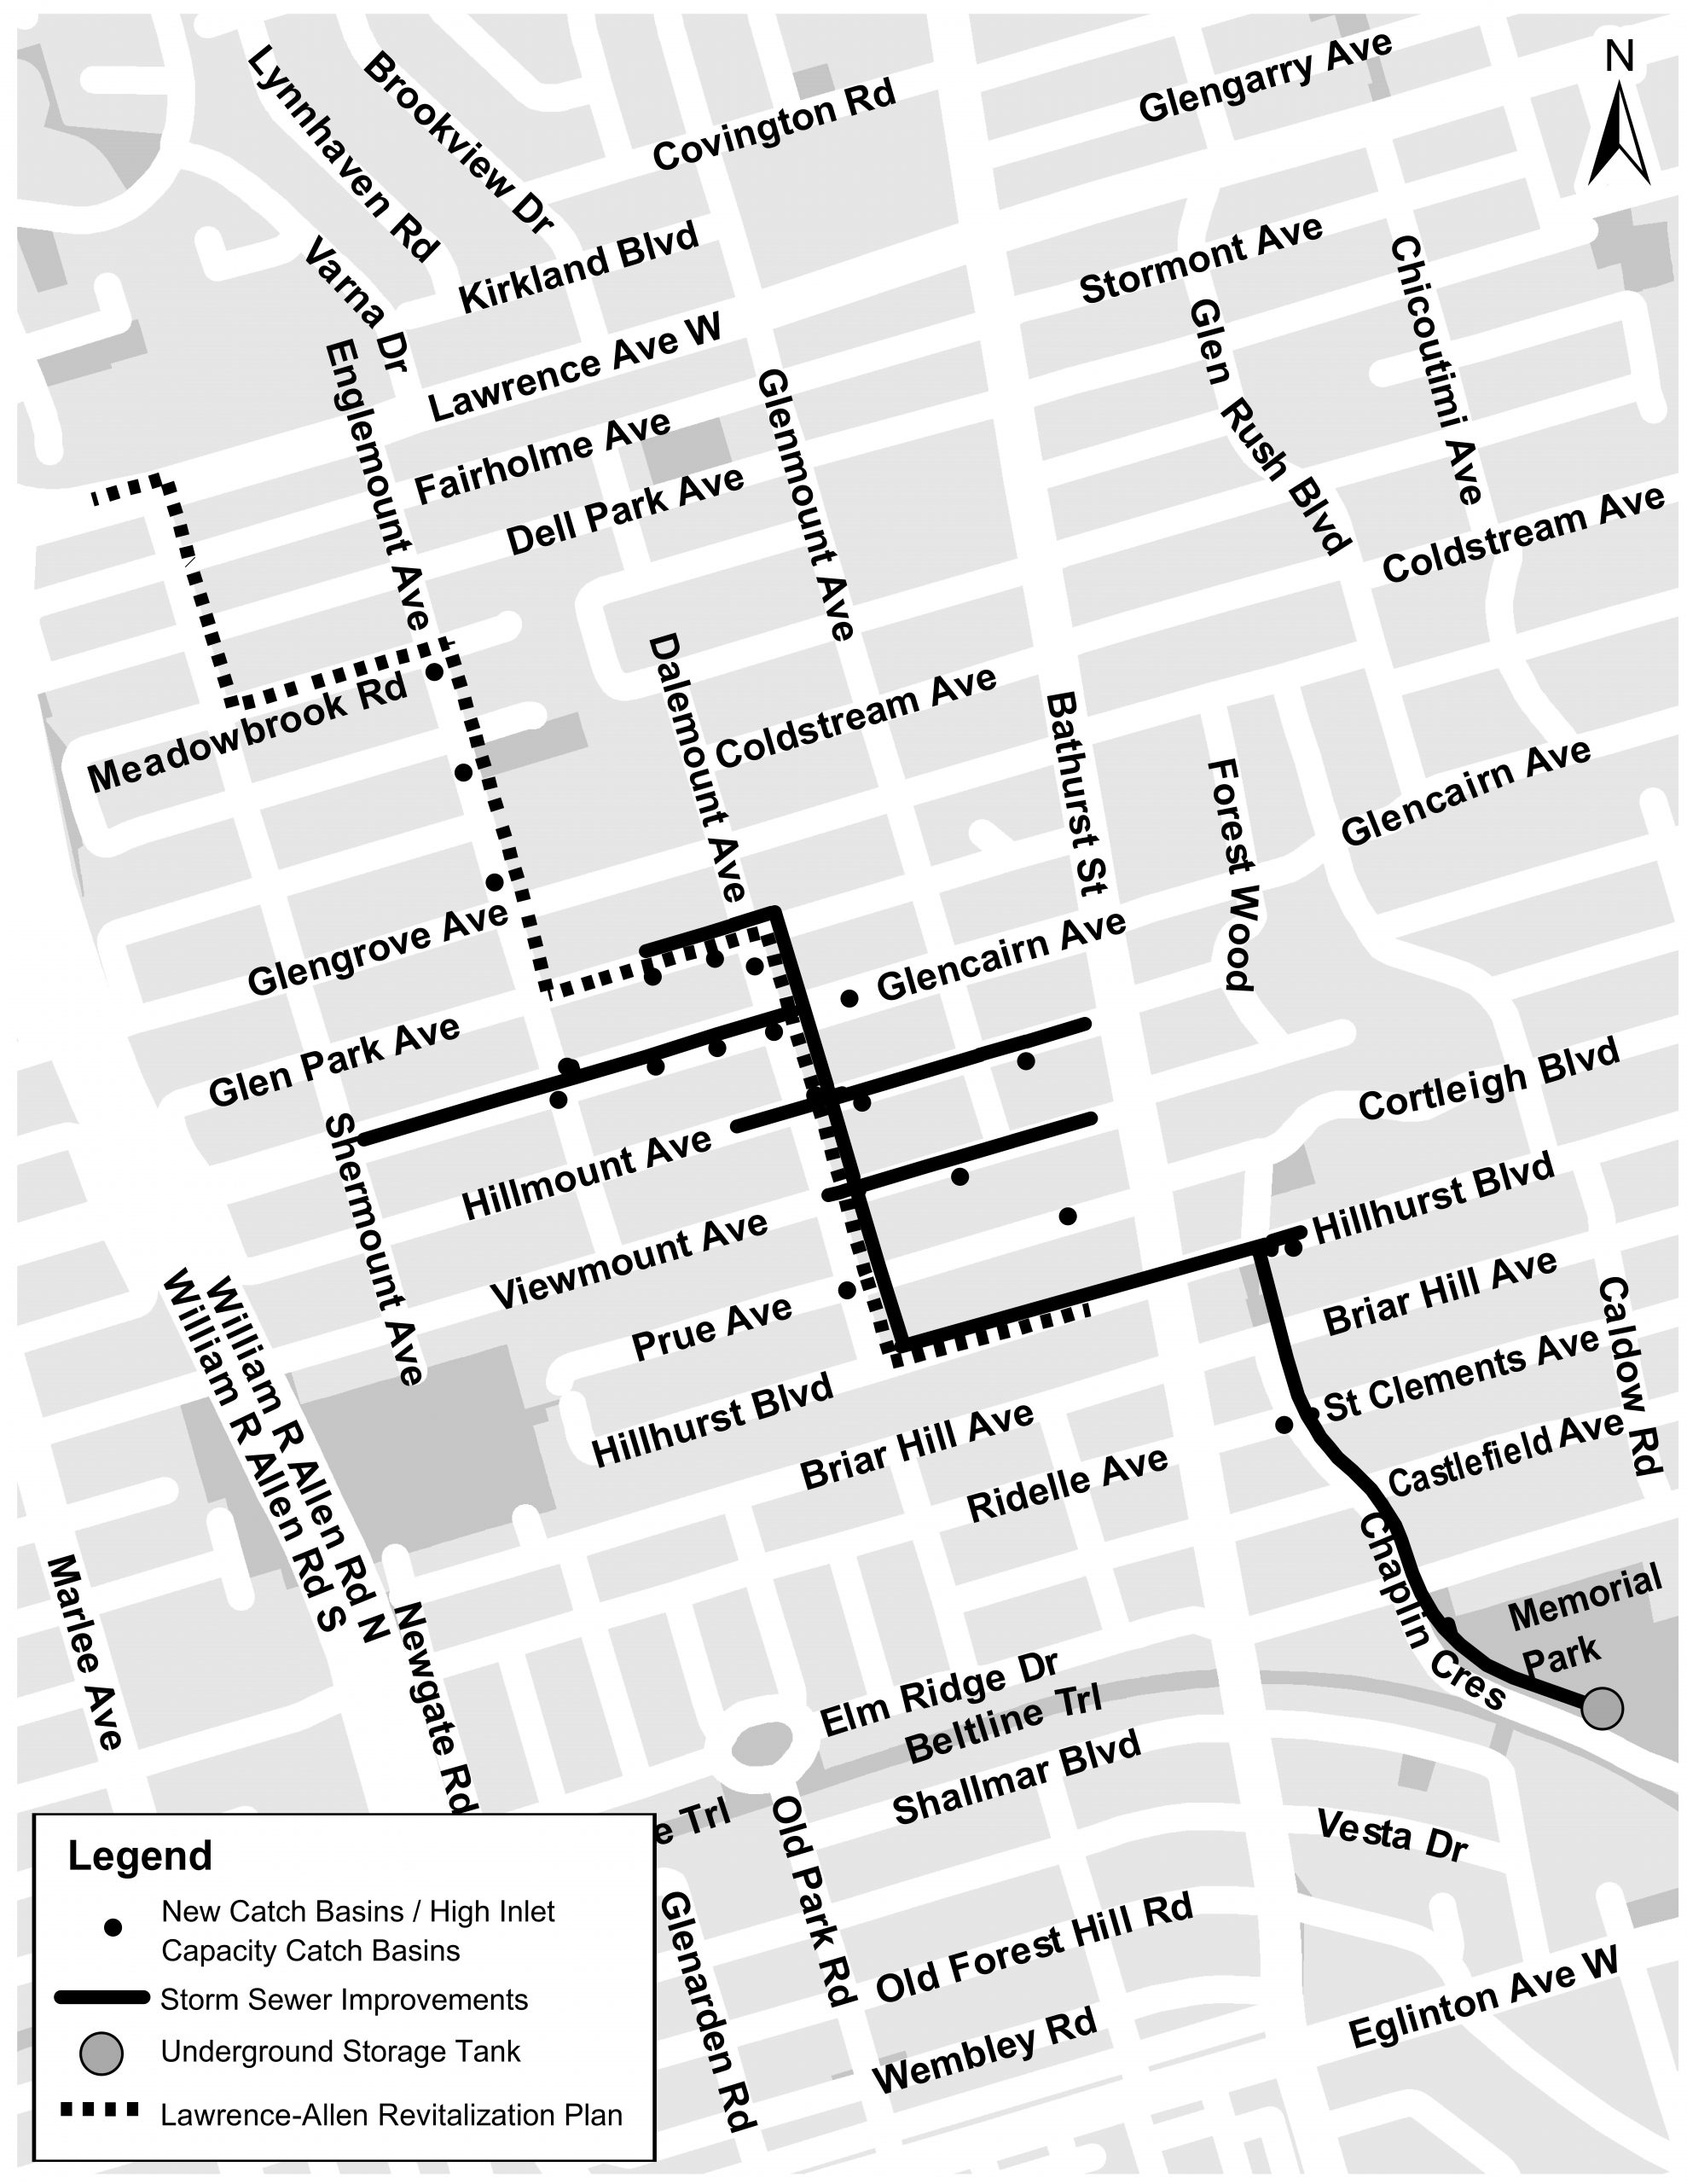 Midtown Relief Sewer Map - New sewer along Dalemount Ave from Glenpark Ave to Hillhurst Blvd and east to Chaplin Cres south to Memorial Park